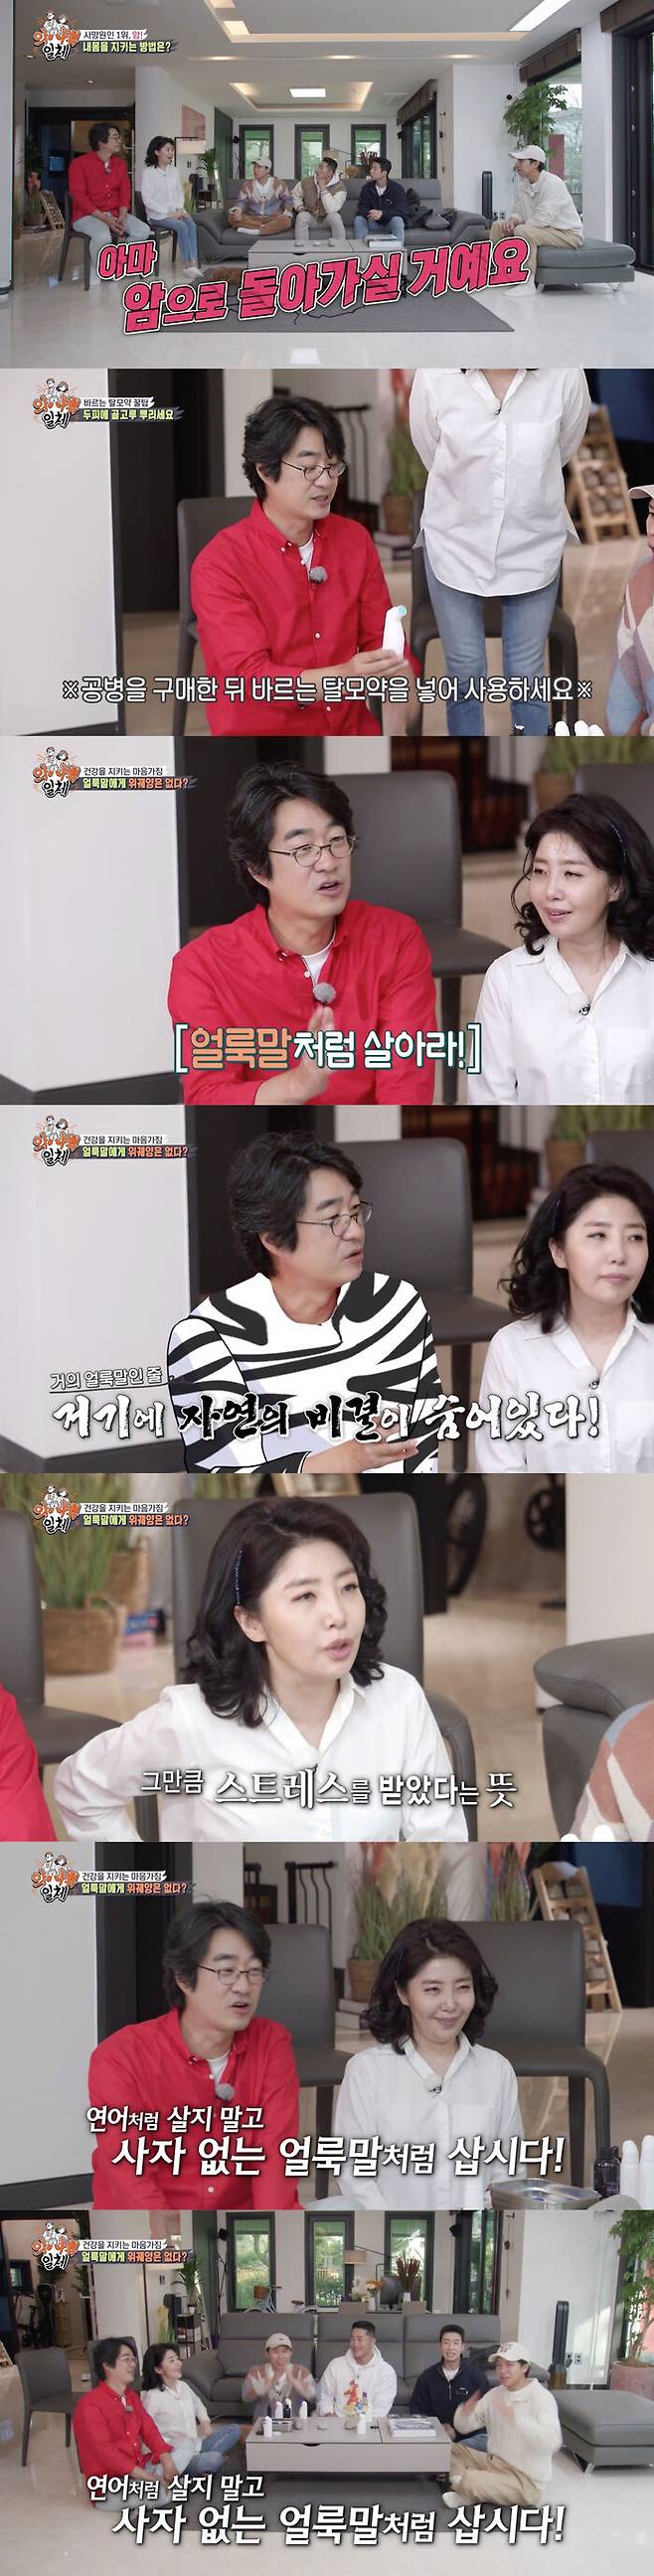 Yeo Esther Hong Hye-geol Initiated how to live by protecting herself from Immunity.On the 5th SBS All The Butlers, the Yeo Esther Hong Hye-geol couple appeared as a sabu.On the day of the broadcast, Yeo Esther surprised everyone by saying, If there are four people here, one of them will die of cancer.The members complained about why they said such an ominous word.Then Hong Hye-geol added: In statistics, one in 3.5 people die of cancer, and the probability of becoming a cancer patient is almost one in two.Cancer also initiates tips to protect my body from the first cancer, a modern cause of death, saying that cancer has a threat but 5, 60% are randomly born.And the Sabu also revealed a simple Immunity diagnostic method and attracted attention.2030 We also disclosed preventive measures against Hair loss, the biggest worry.In addition, the Hair Loss drug, which is applied with water parse engineers, is also initiated to make the members attractive.Finally, Hong Hye-geol advised members to live like zebras, who said: Africas zebras have no stomach ulcers.How can you eat delicious food when you have a lion in front of you? Maybe stress can cause gastrointestinal problems and a fever.There is a secret of nature hidden there. We must live like that. Everyone is worried and anxious about big and small, but it is not that the trouble is covered by the lion or anything.I do not have a stomach ulcer in the zebra that lives with the lion, he advised. I would like to learn that I eat rice comfortably as soon as I graze the lion, even if it is eaten.Yeo Esther stressed not to live like a salmon, saying: Salmon flows backward to return to their hometown where they lived and lets the adrenaline come out to the end.Then Immunity falls, he said. In fact, when you dissect salmon, your adrenal glands are swollen and dead, which means you are stressed. 